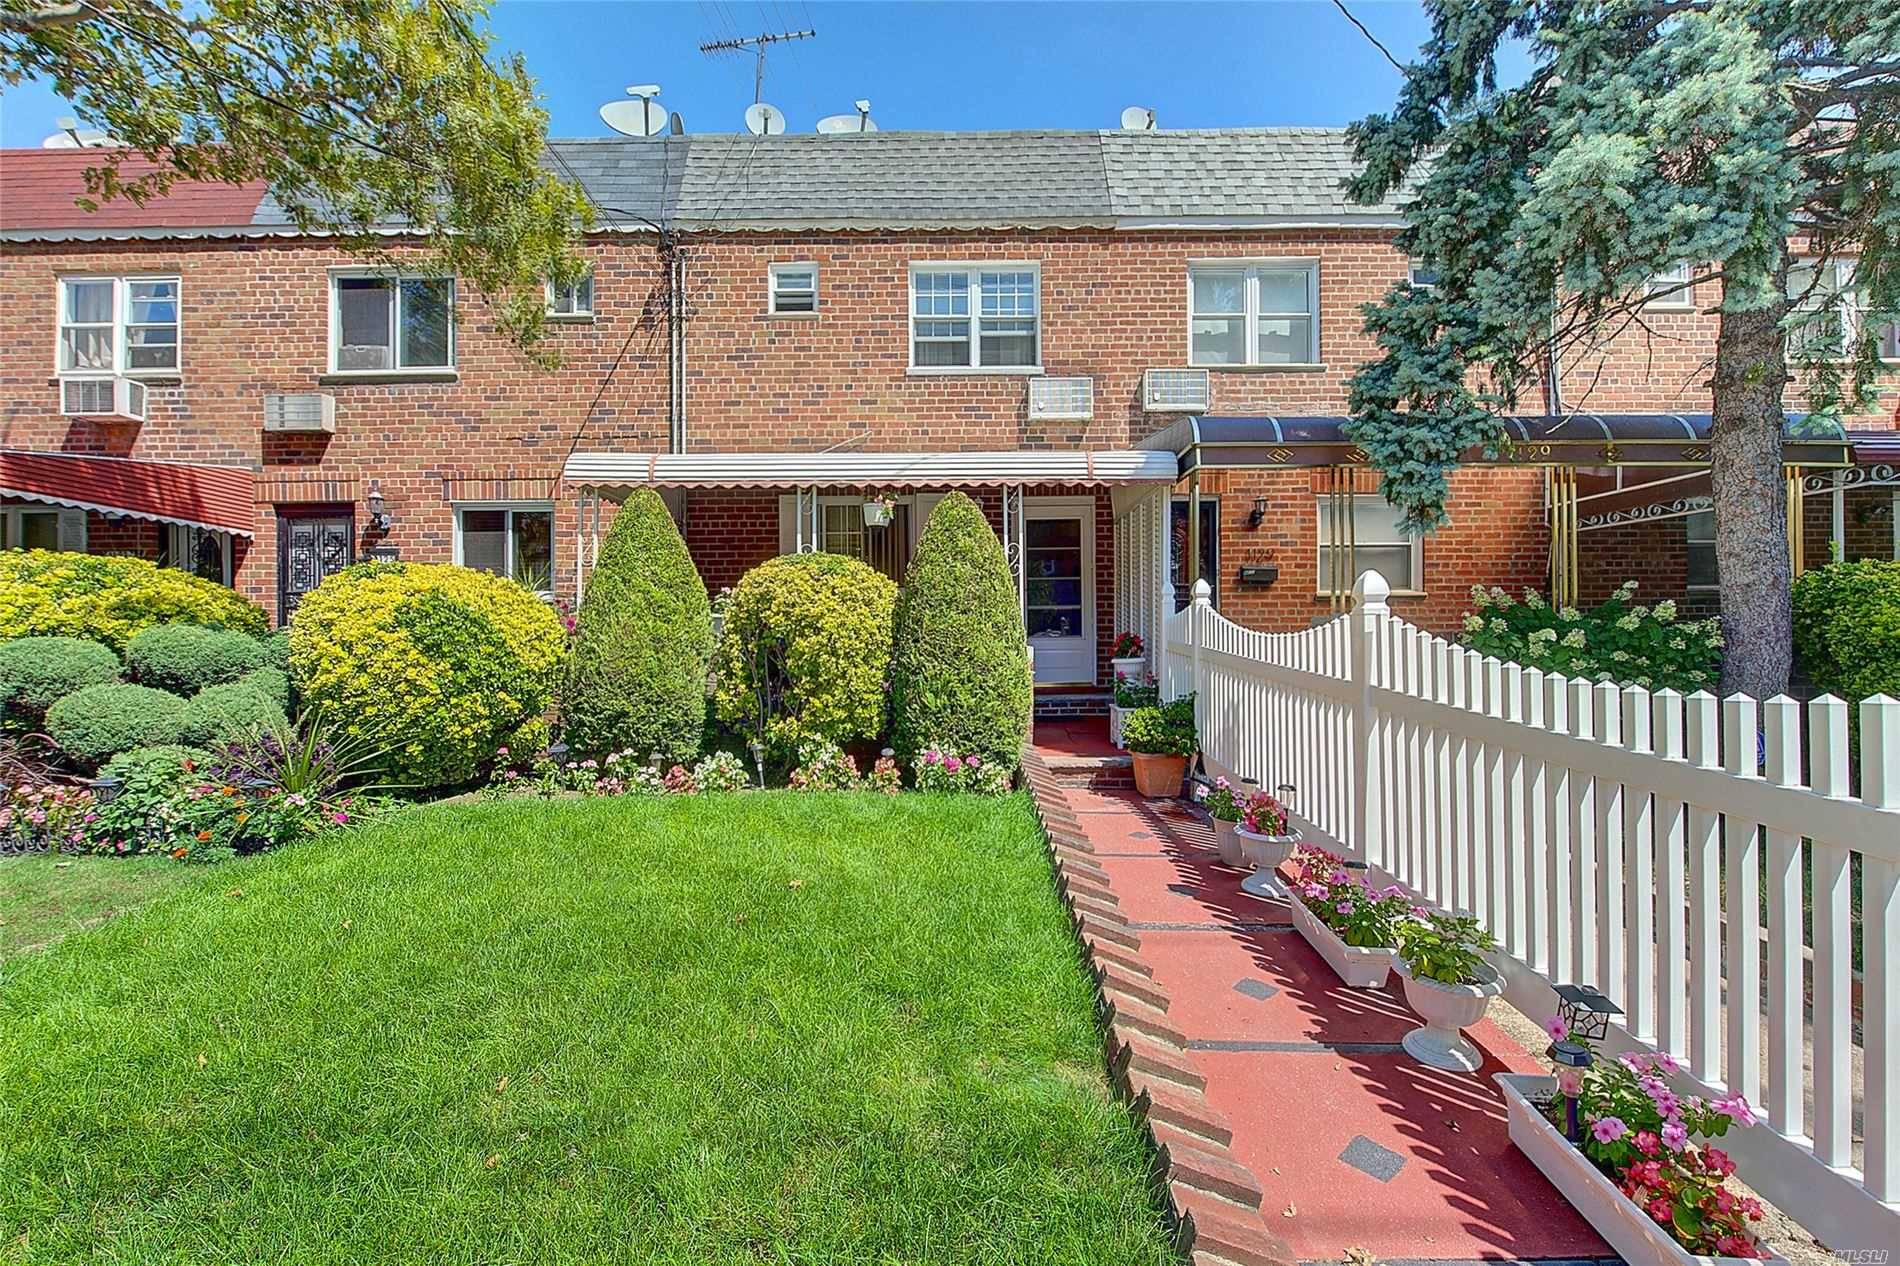 Lovely single family brick home located in Canarsie Brooklyn.